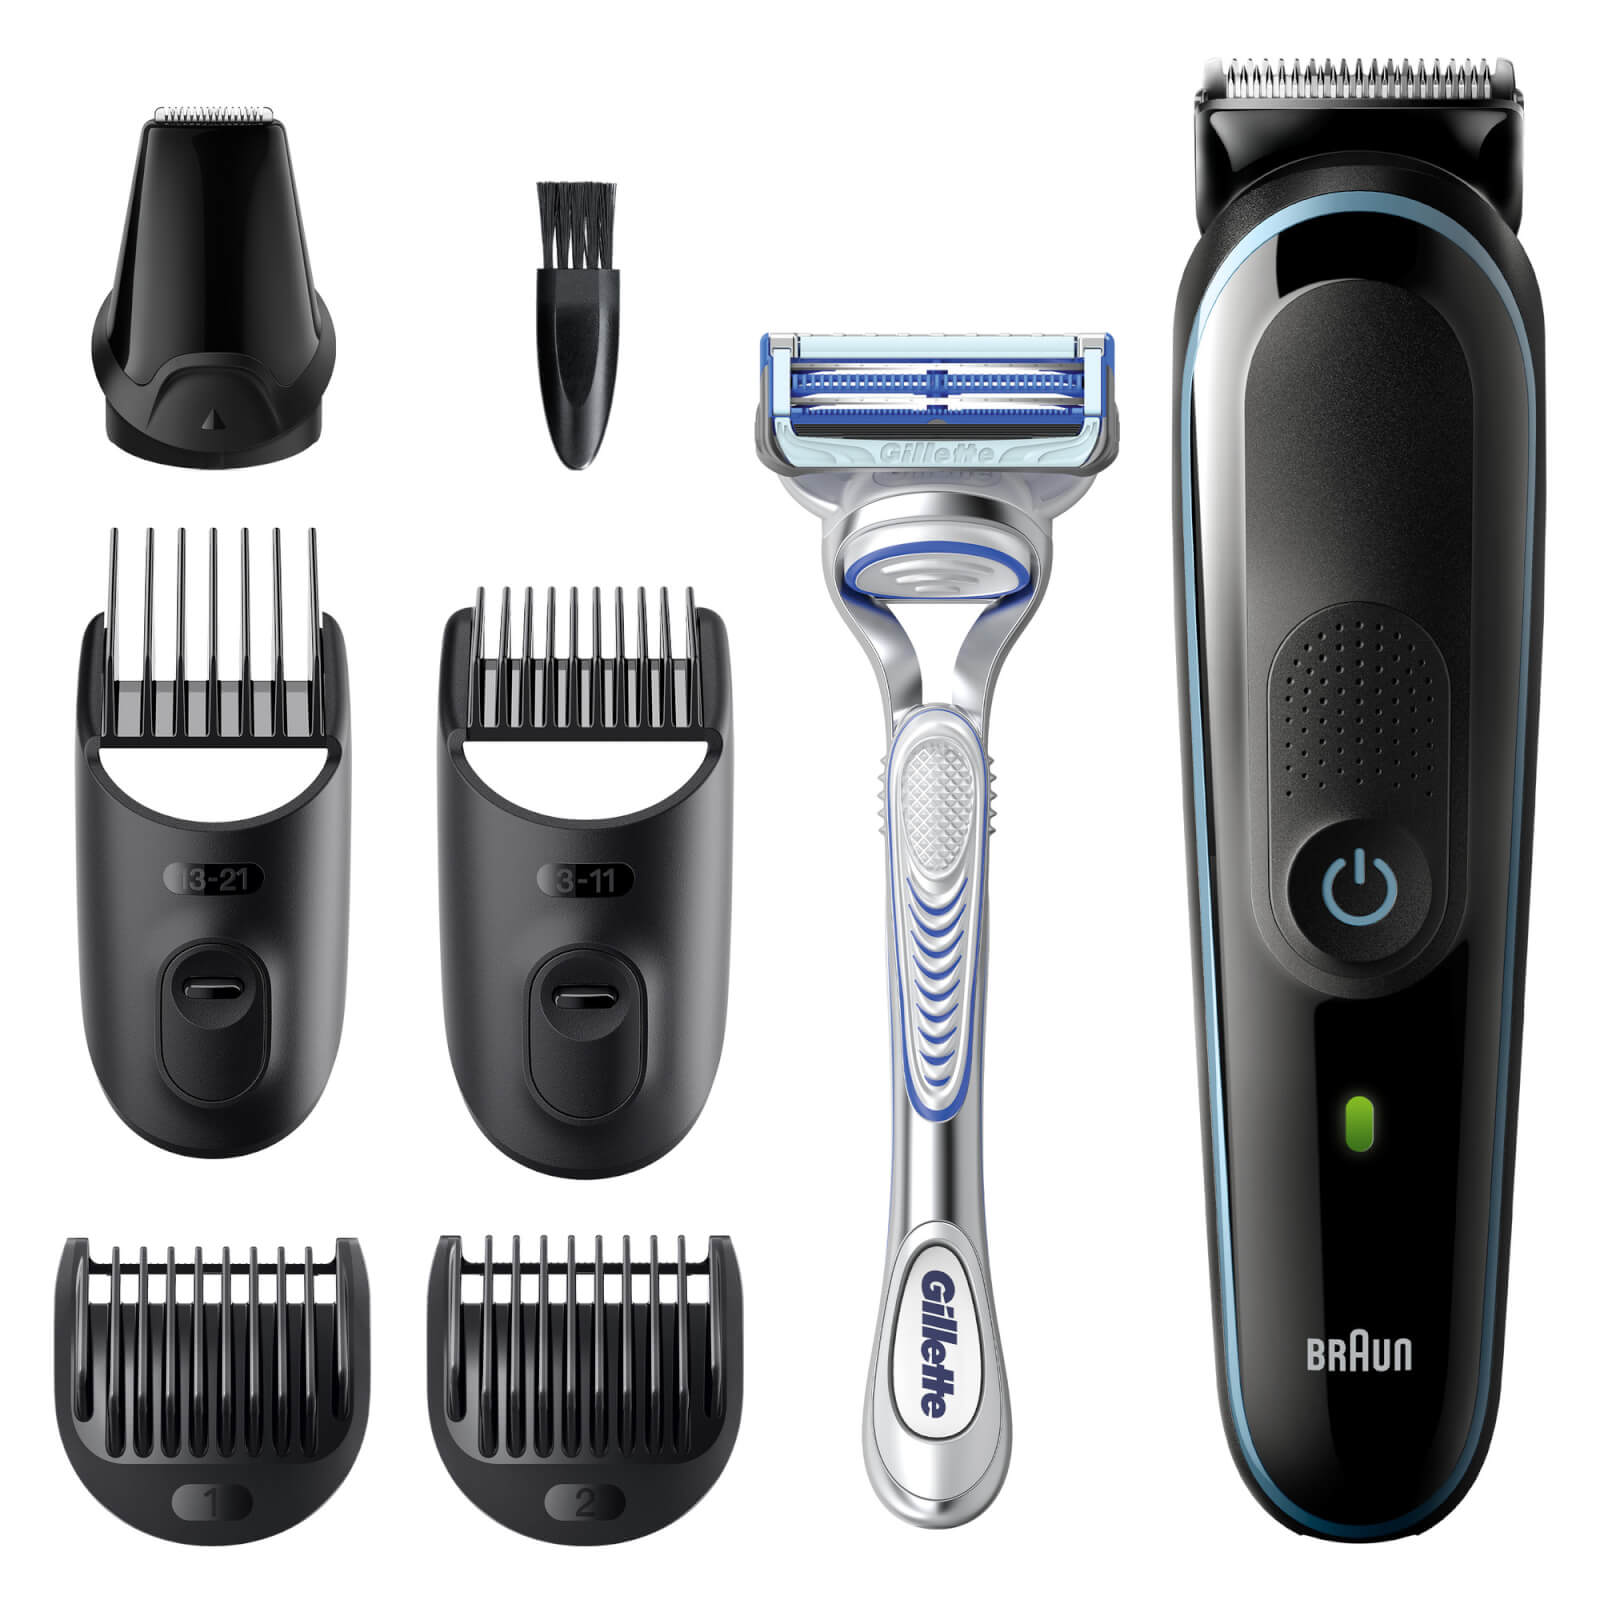 

Braun All-in-one Trimmer 3 MG3342, Black/Blue